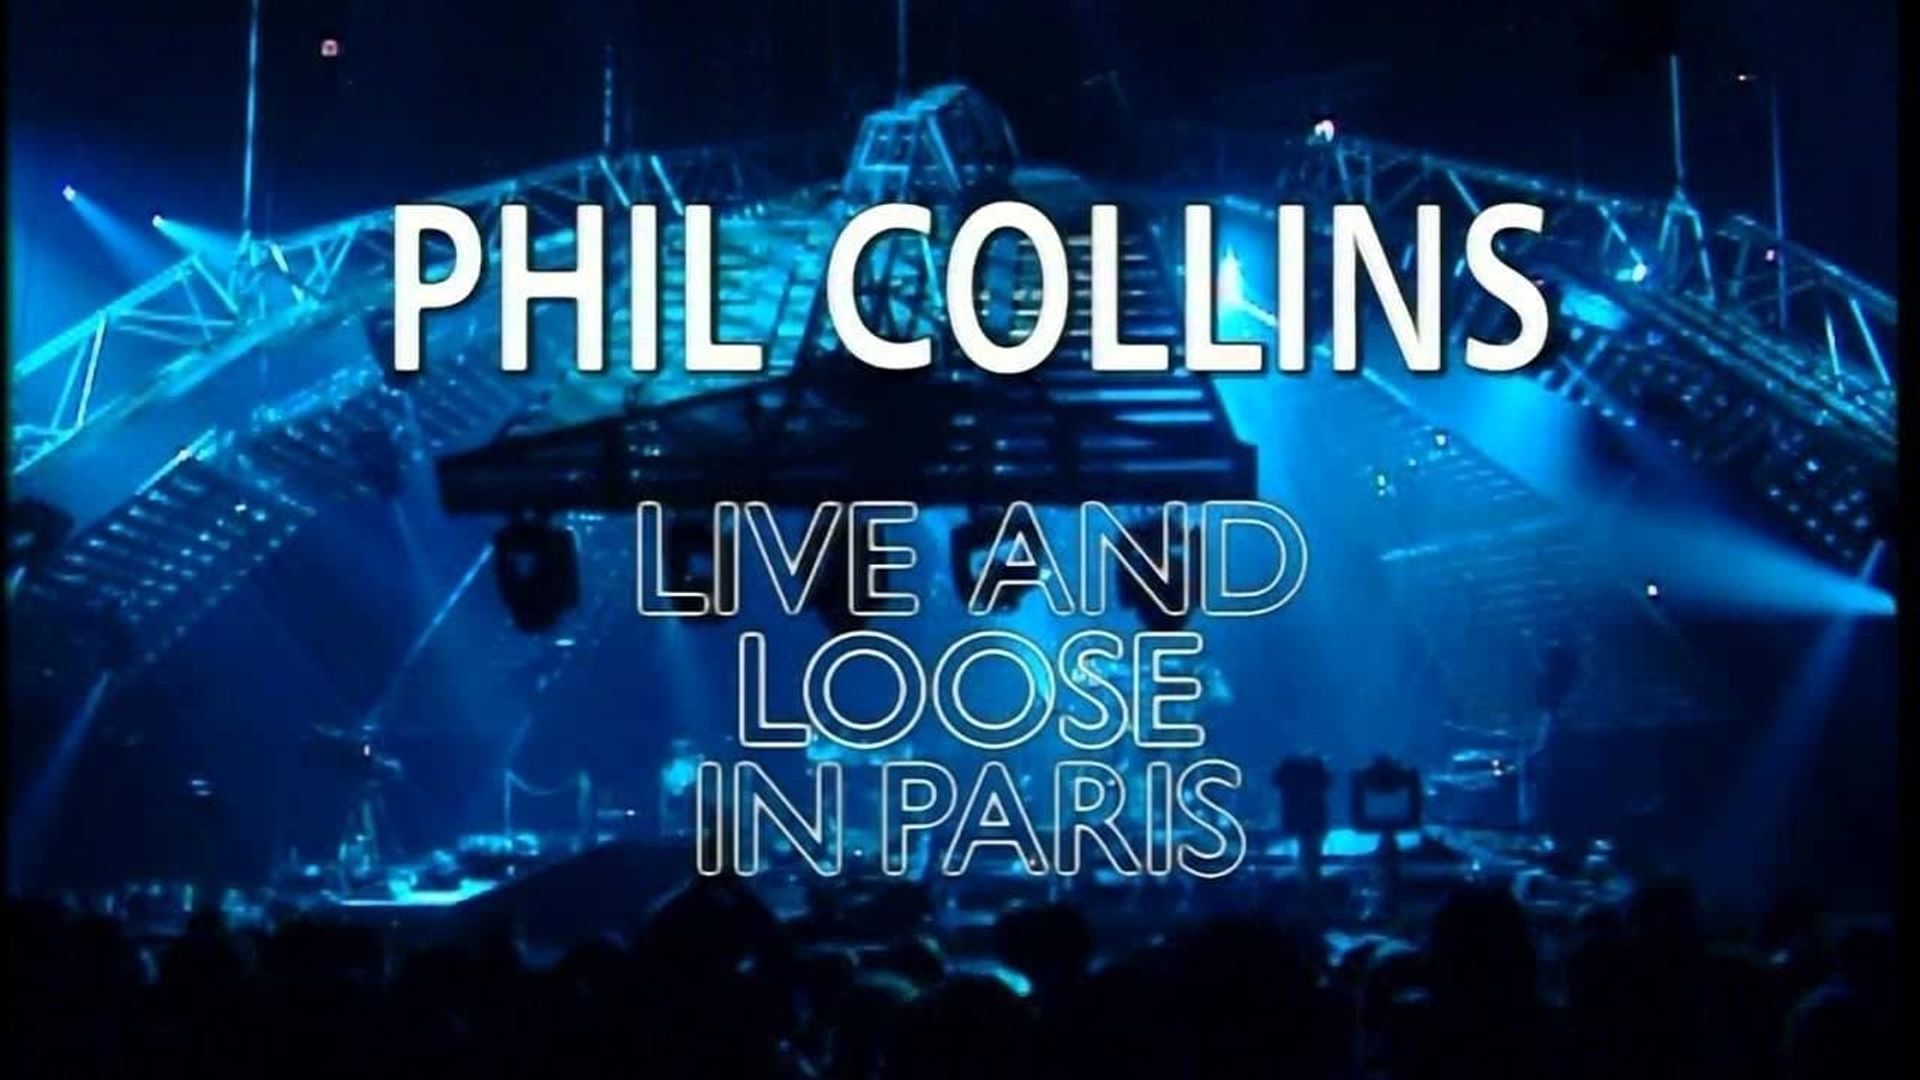 Phil Collins: Live and Loose in Paris background